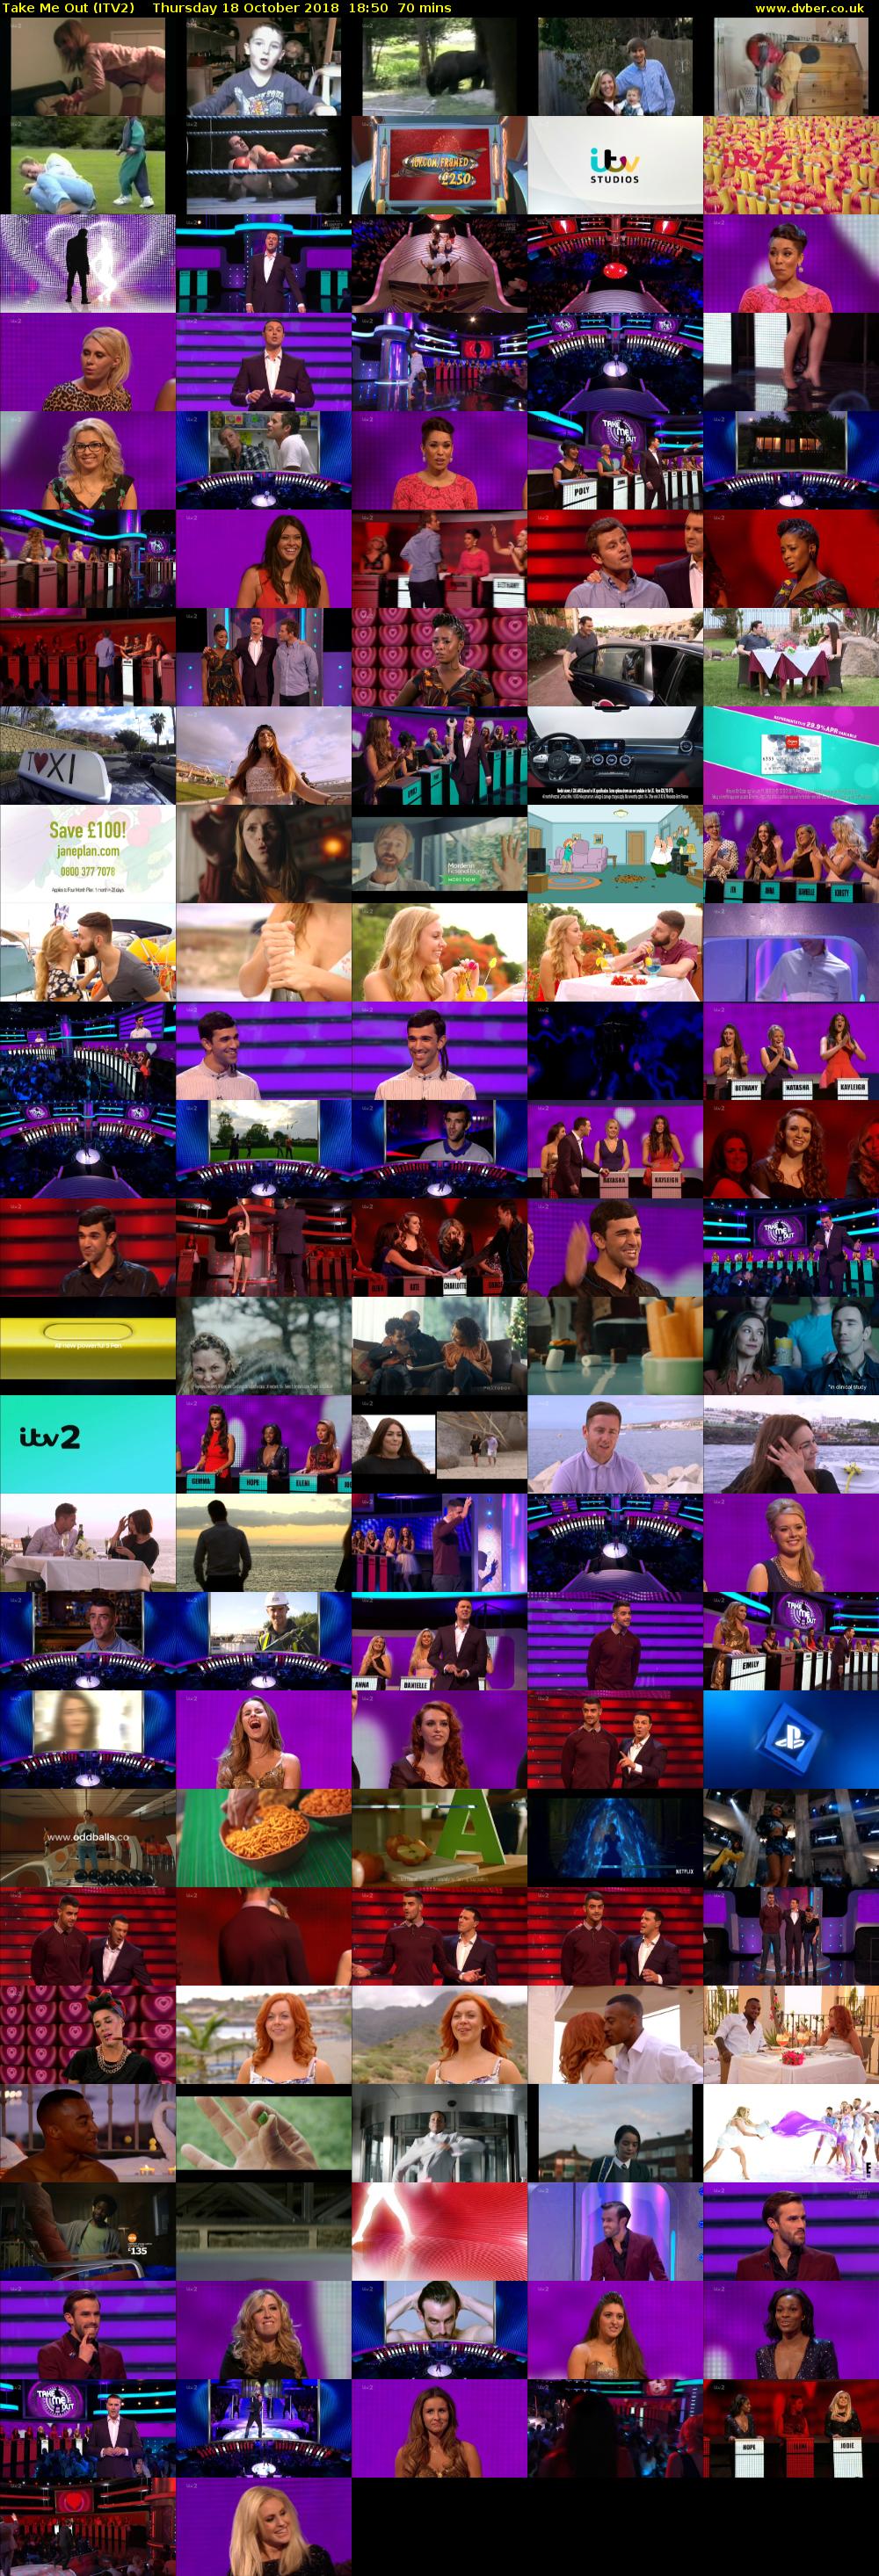 Take Me Out (ITV2) Thursday 18 October 2018 18:50 - 20:00